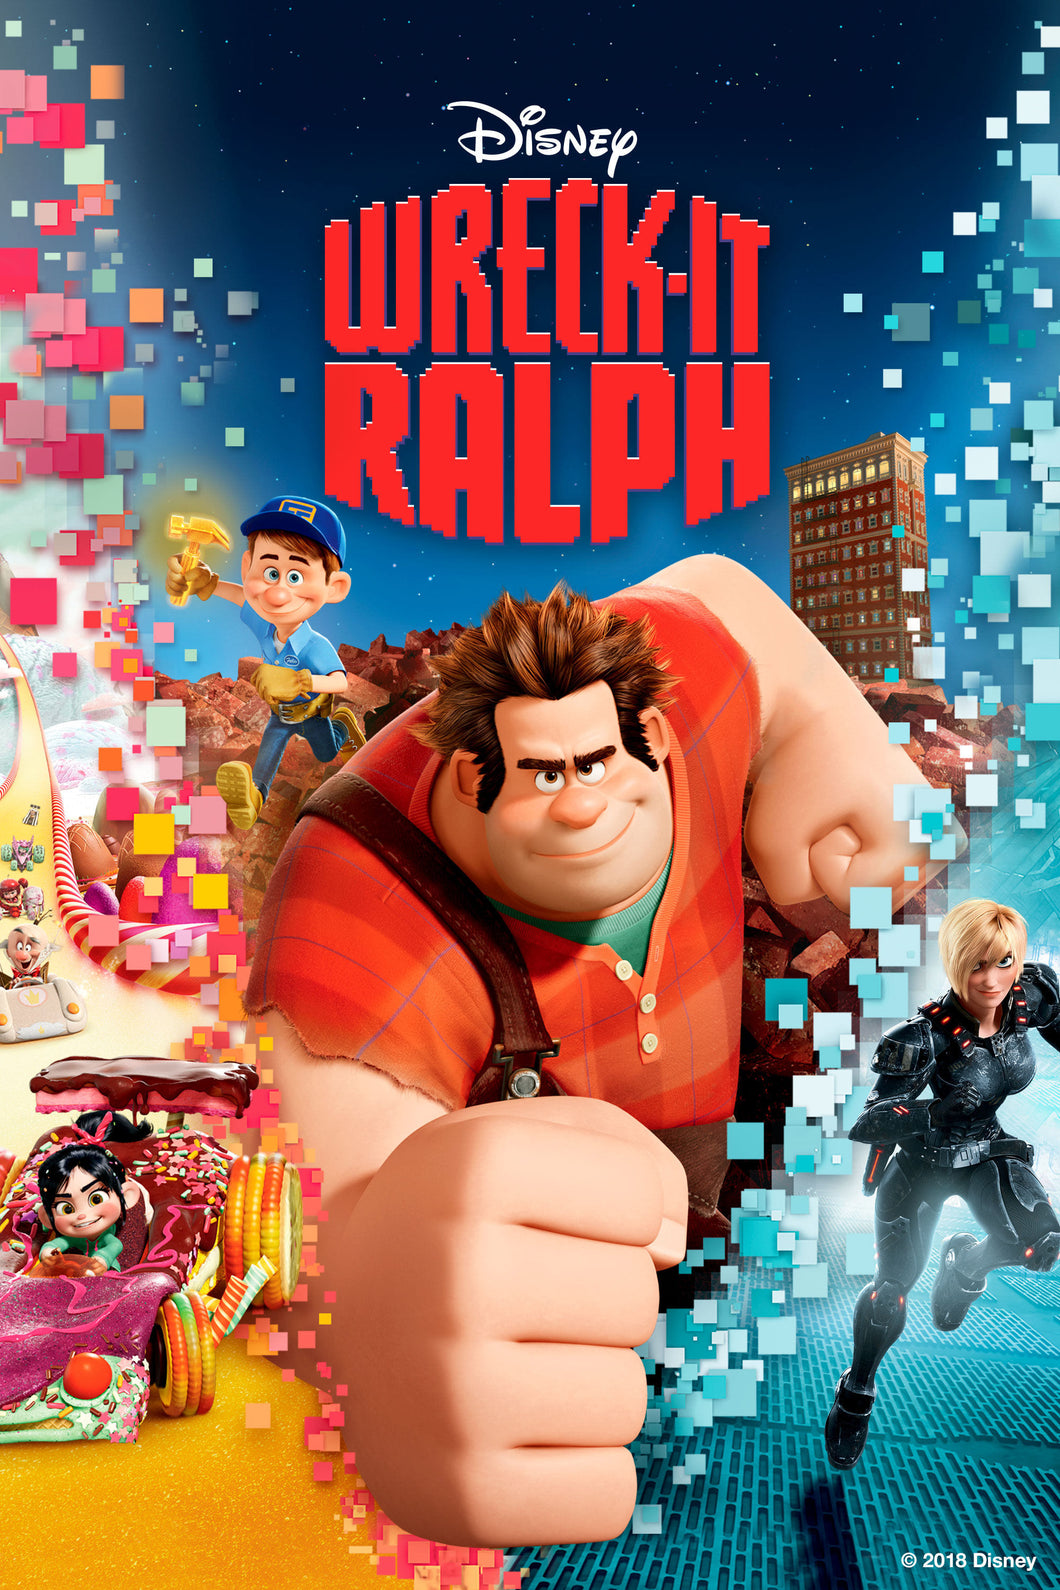 Wreck-It Ralph (2012) V2 Animated Movie Poster Framed or Unframed Glossy Poster Free UK Shipping!!!